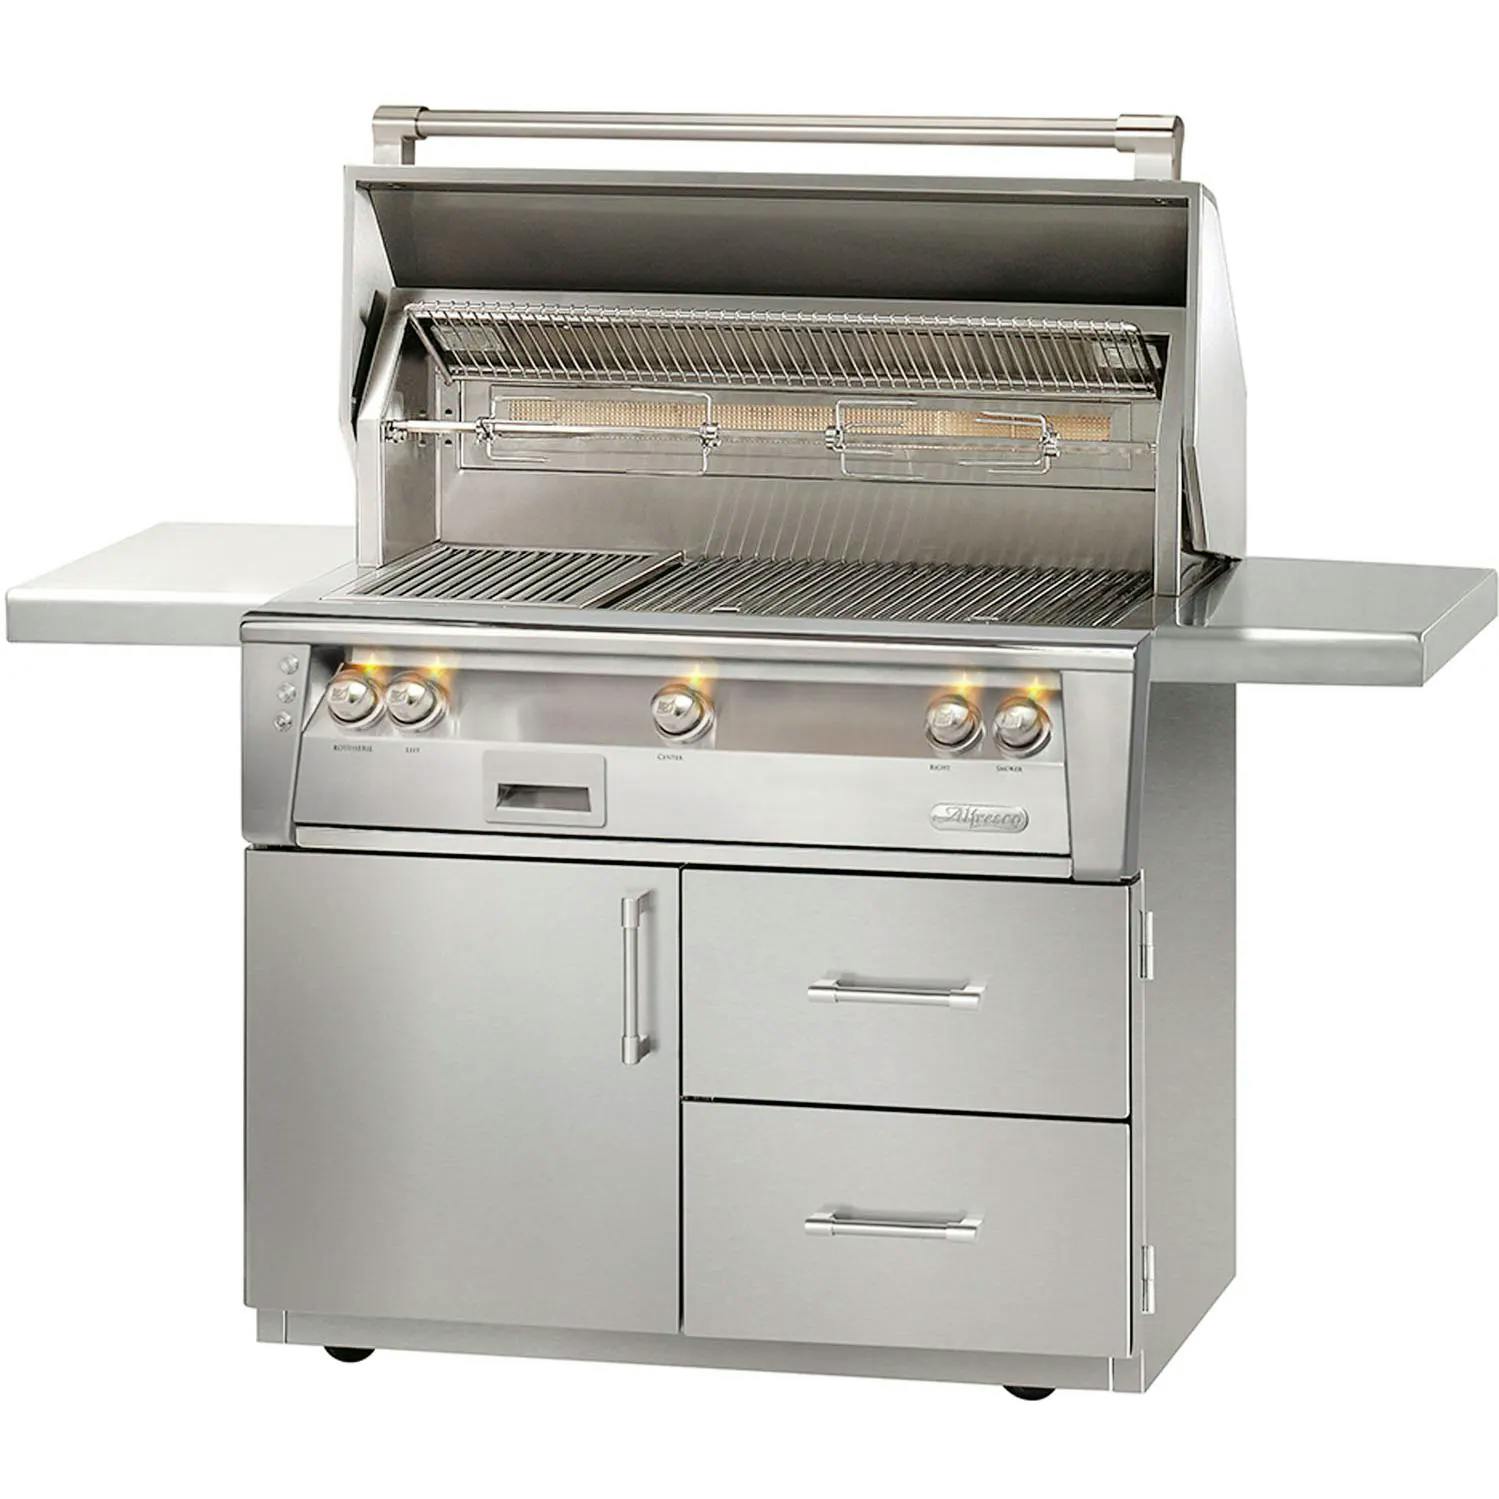 Alfresco ALXE Gas Grill On Deluxe Cart with Sear Zone and Rotisserie · 42 in. · Natural Gas